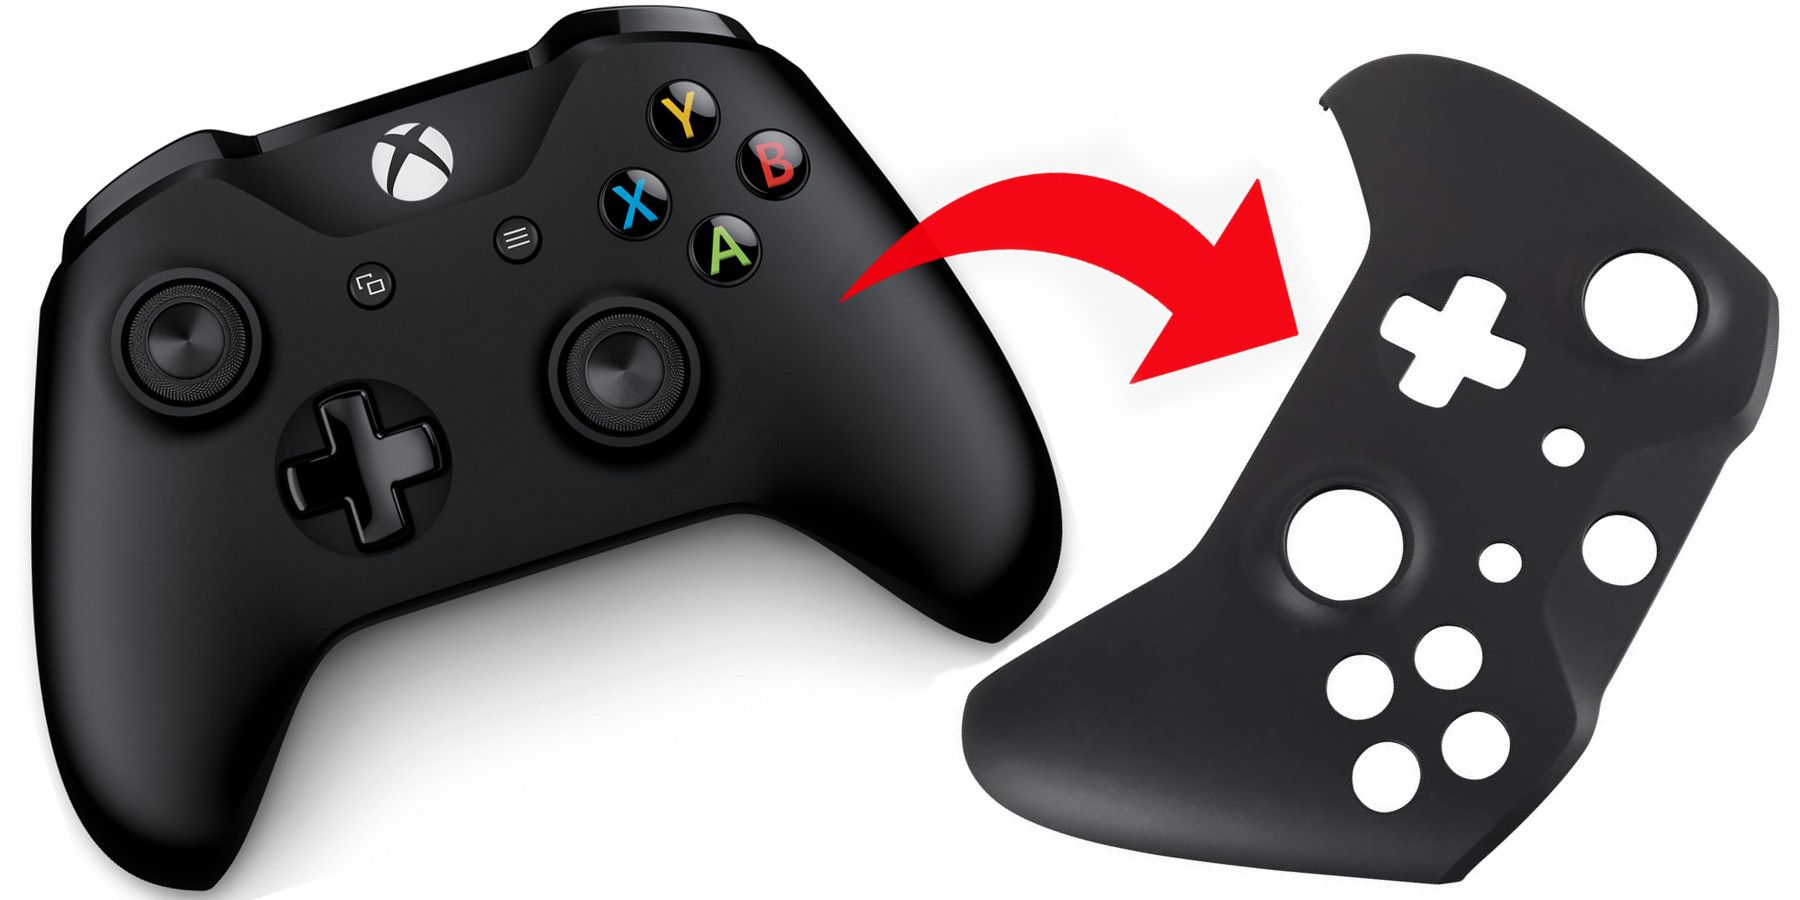 Microsoft sells replacement parts to repair Xbox controllers - Pureinfotech